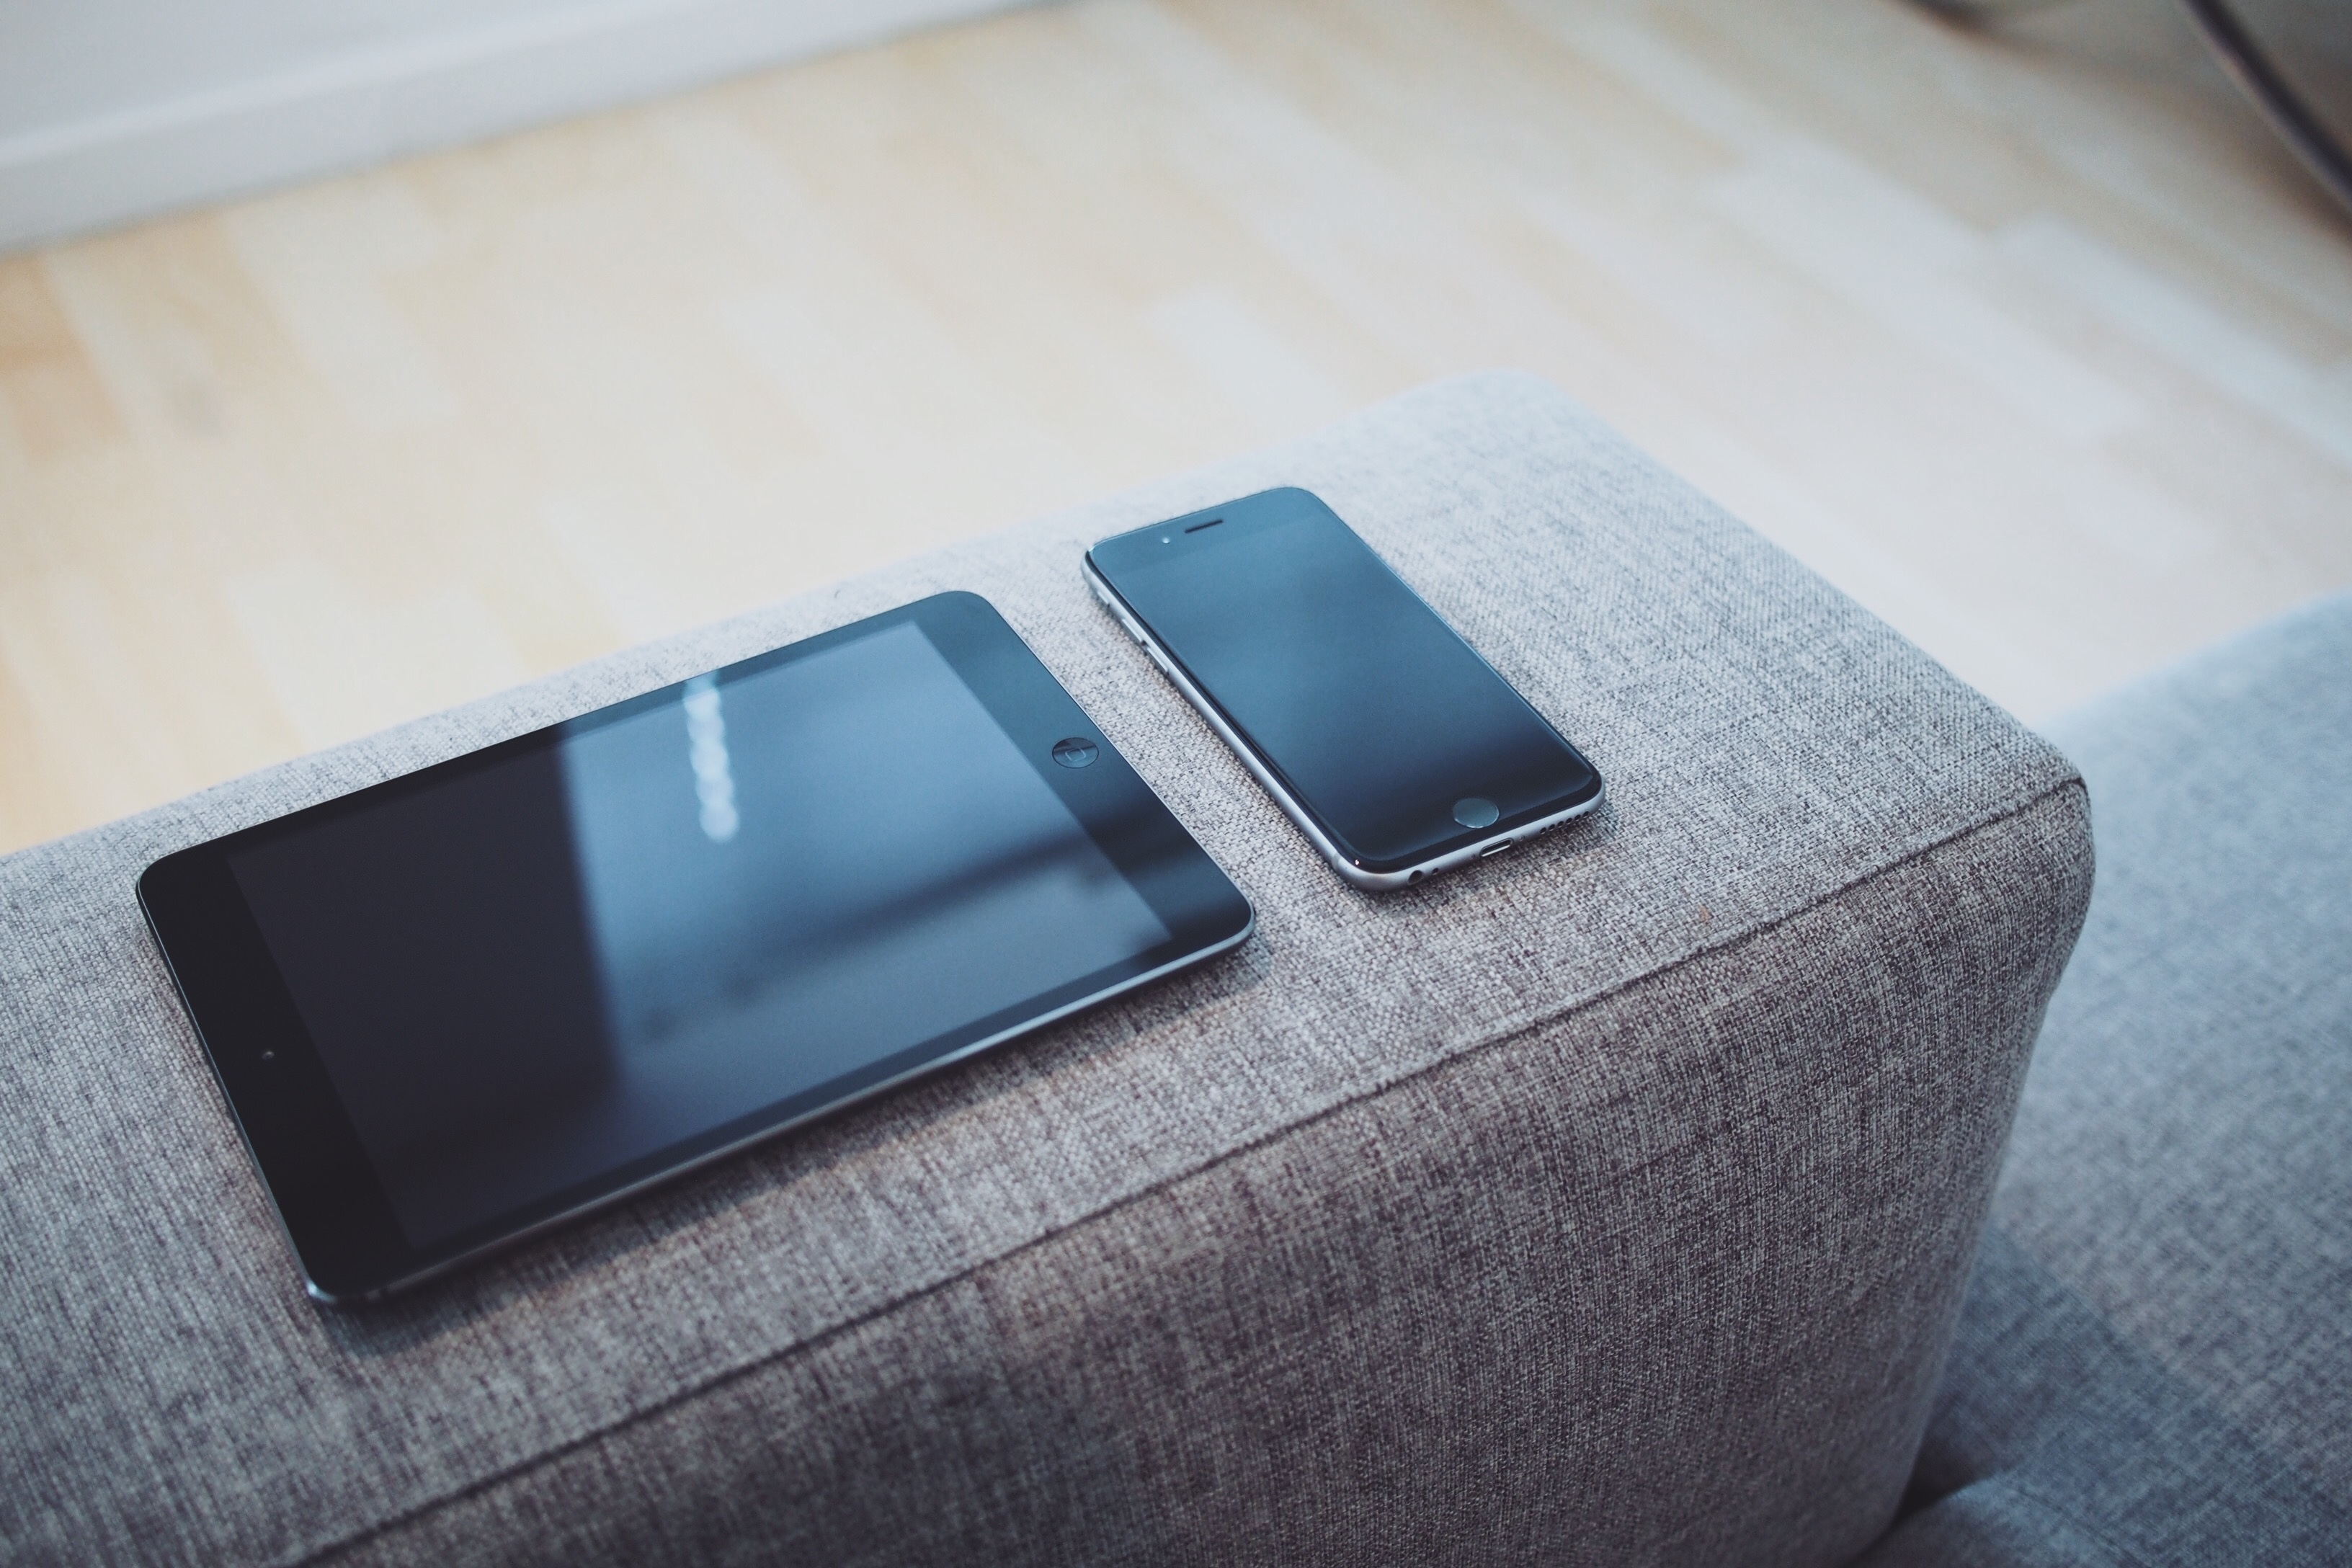 mobile devices on a couch arm